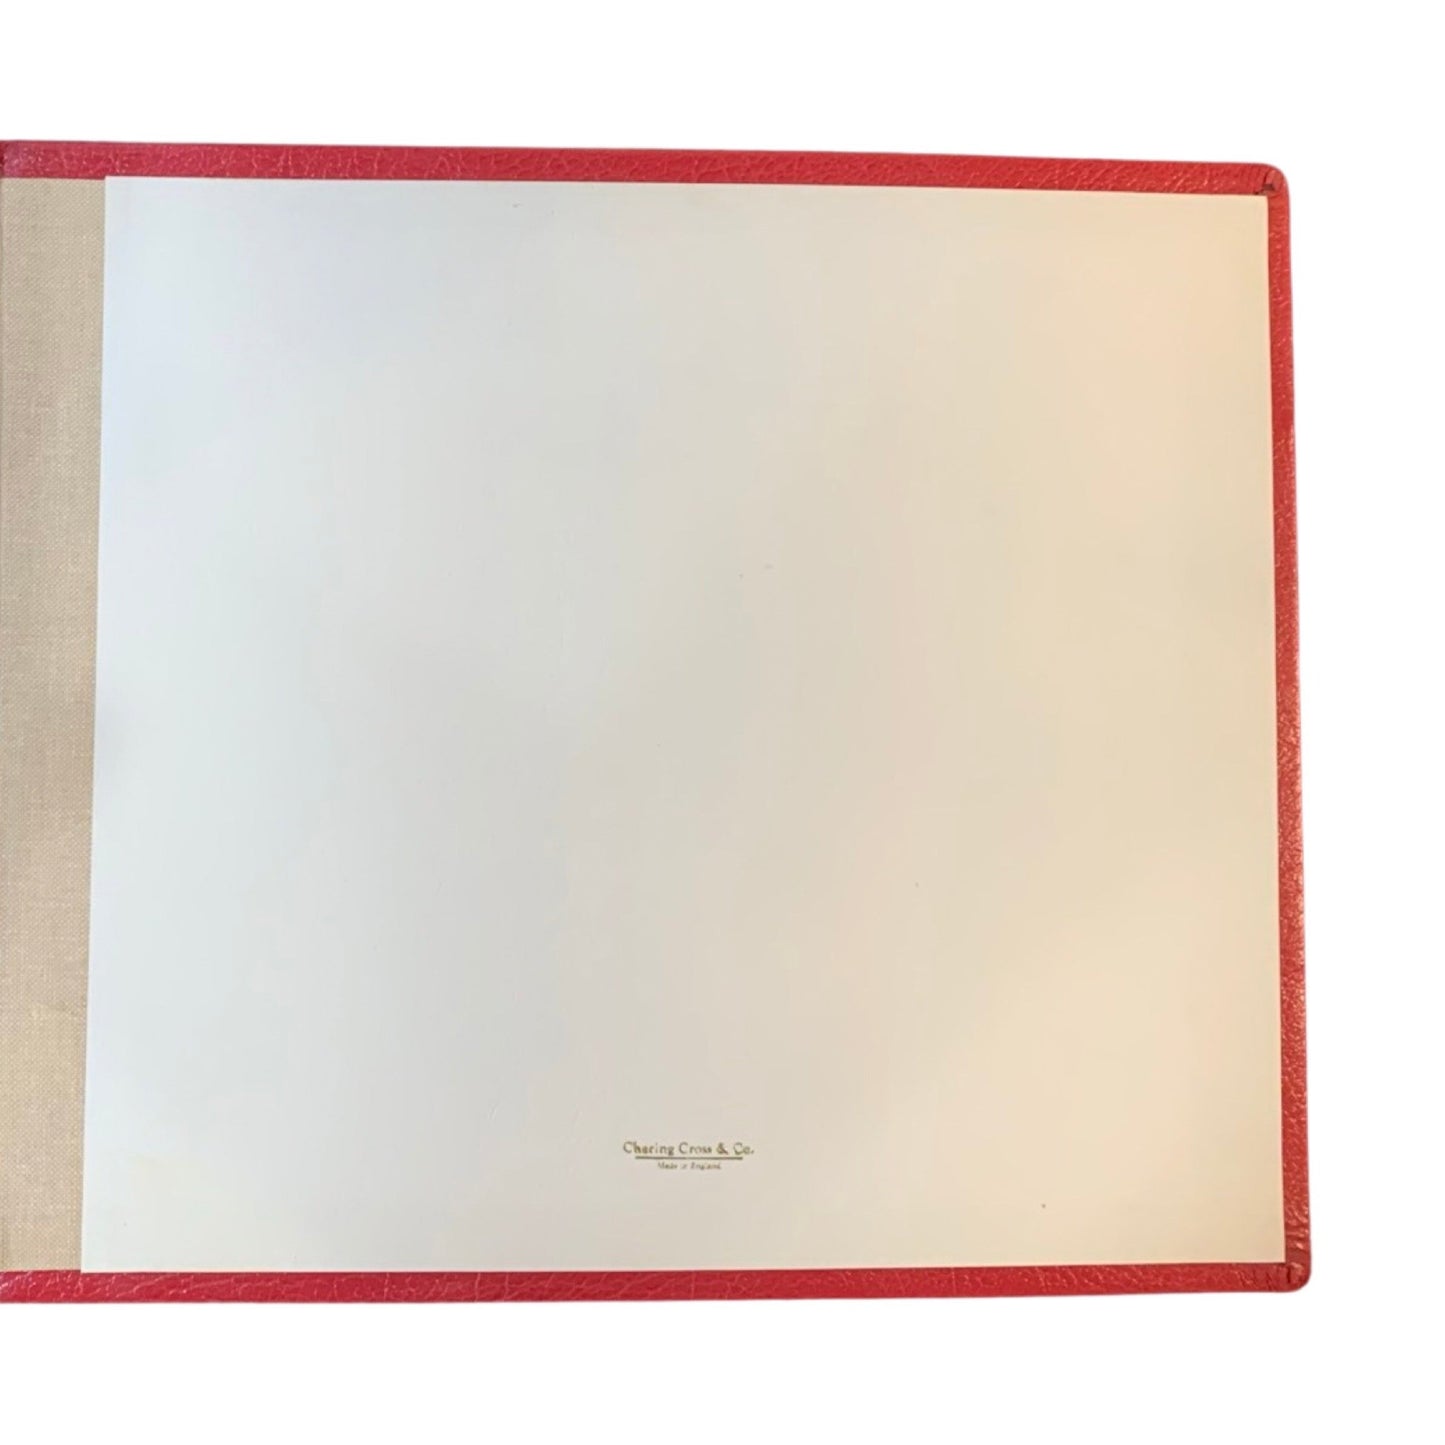 Leatherbound Scrapbook | Photo Album | Scarlet Embossed Calf | Thick Pages | 10" x 12" | MARIAN & DICK | 3 Lines of Text